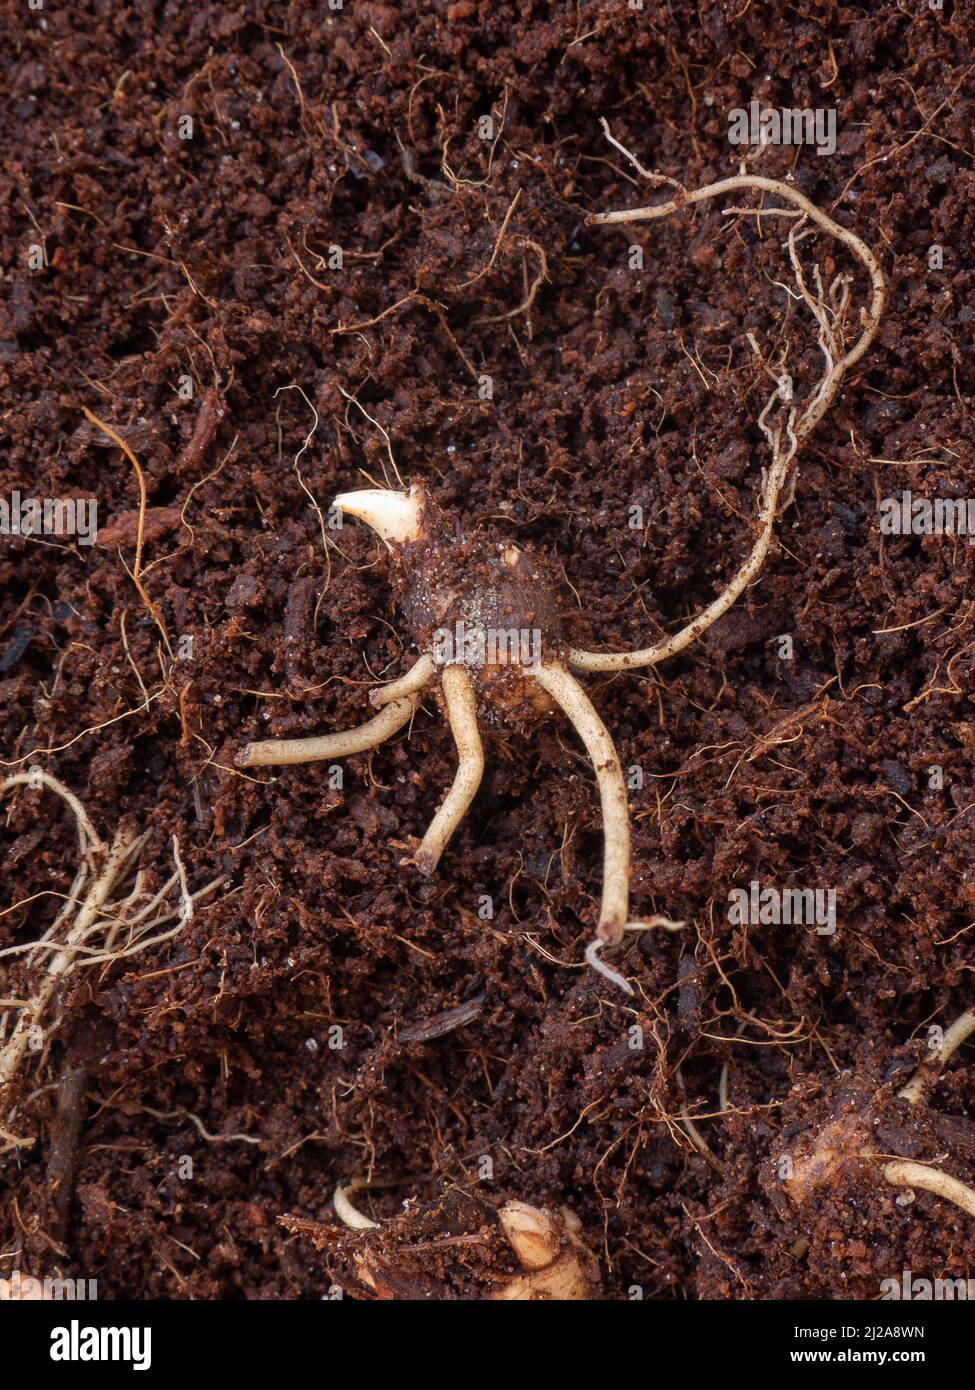 A close up of a Dodecathon media bulb showing the fresh new shoot and root growth ready for planting Stock Photo